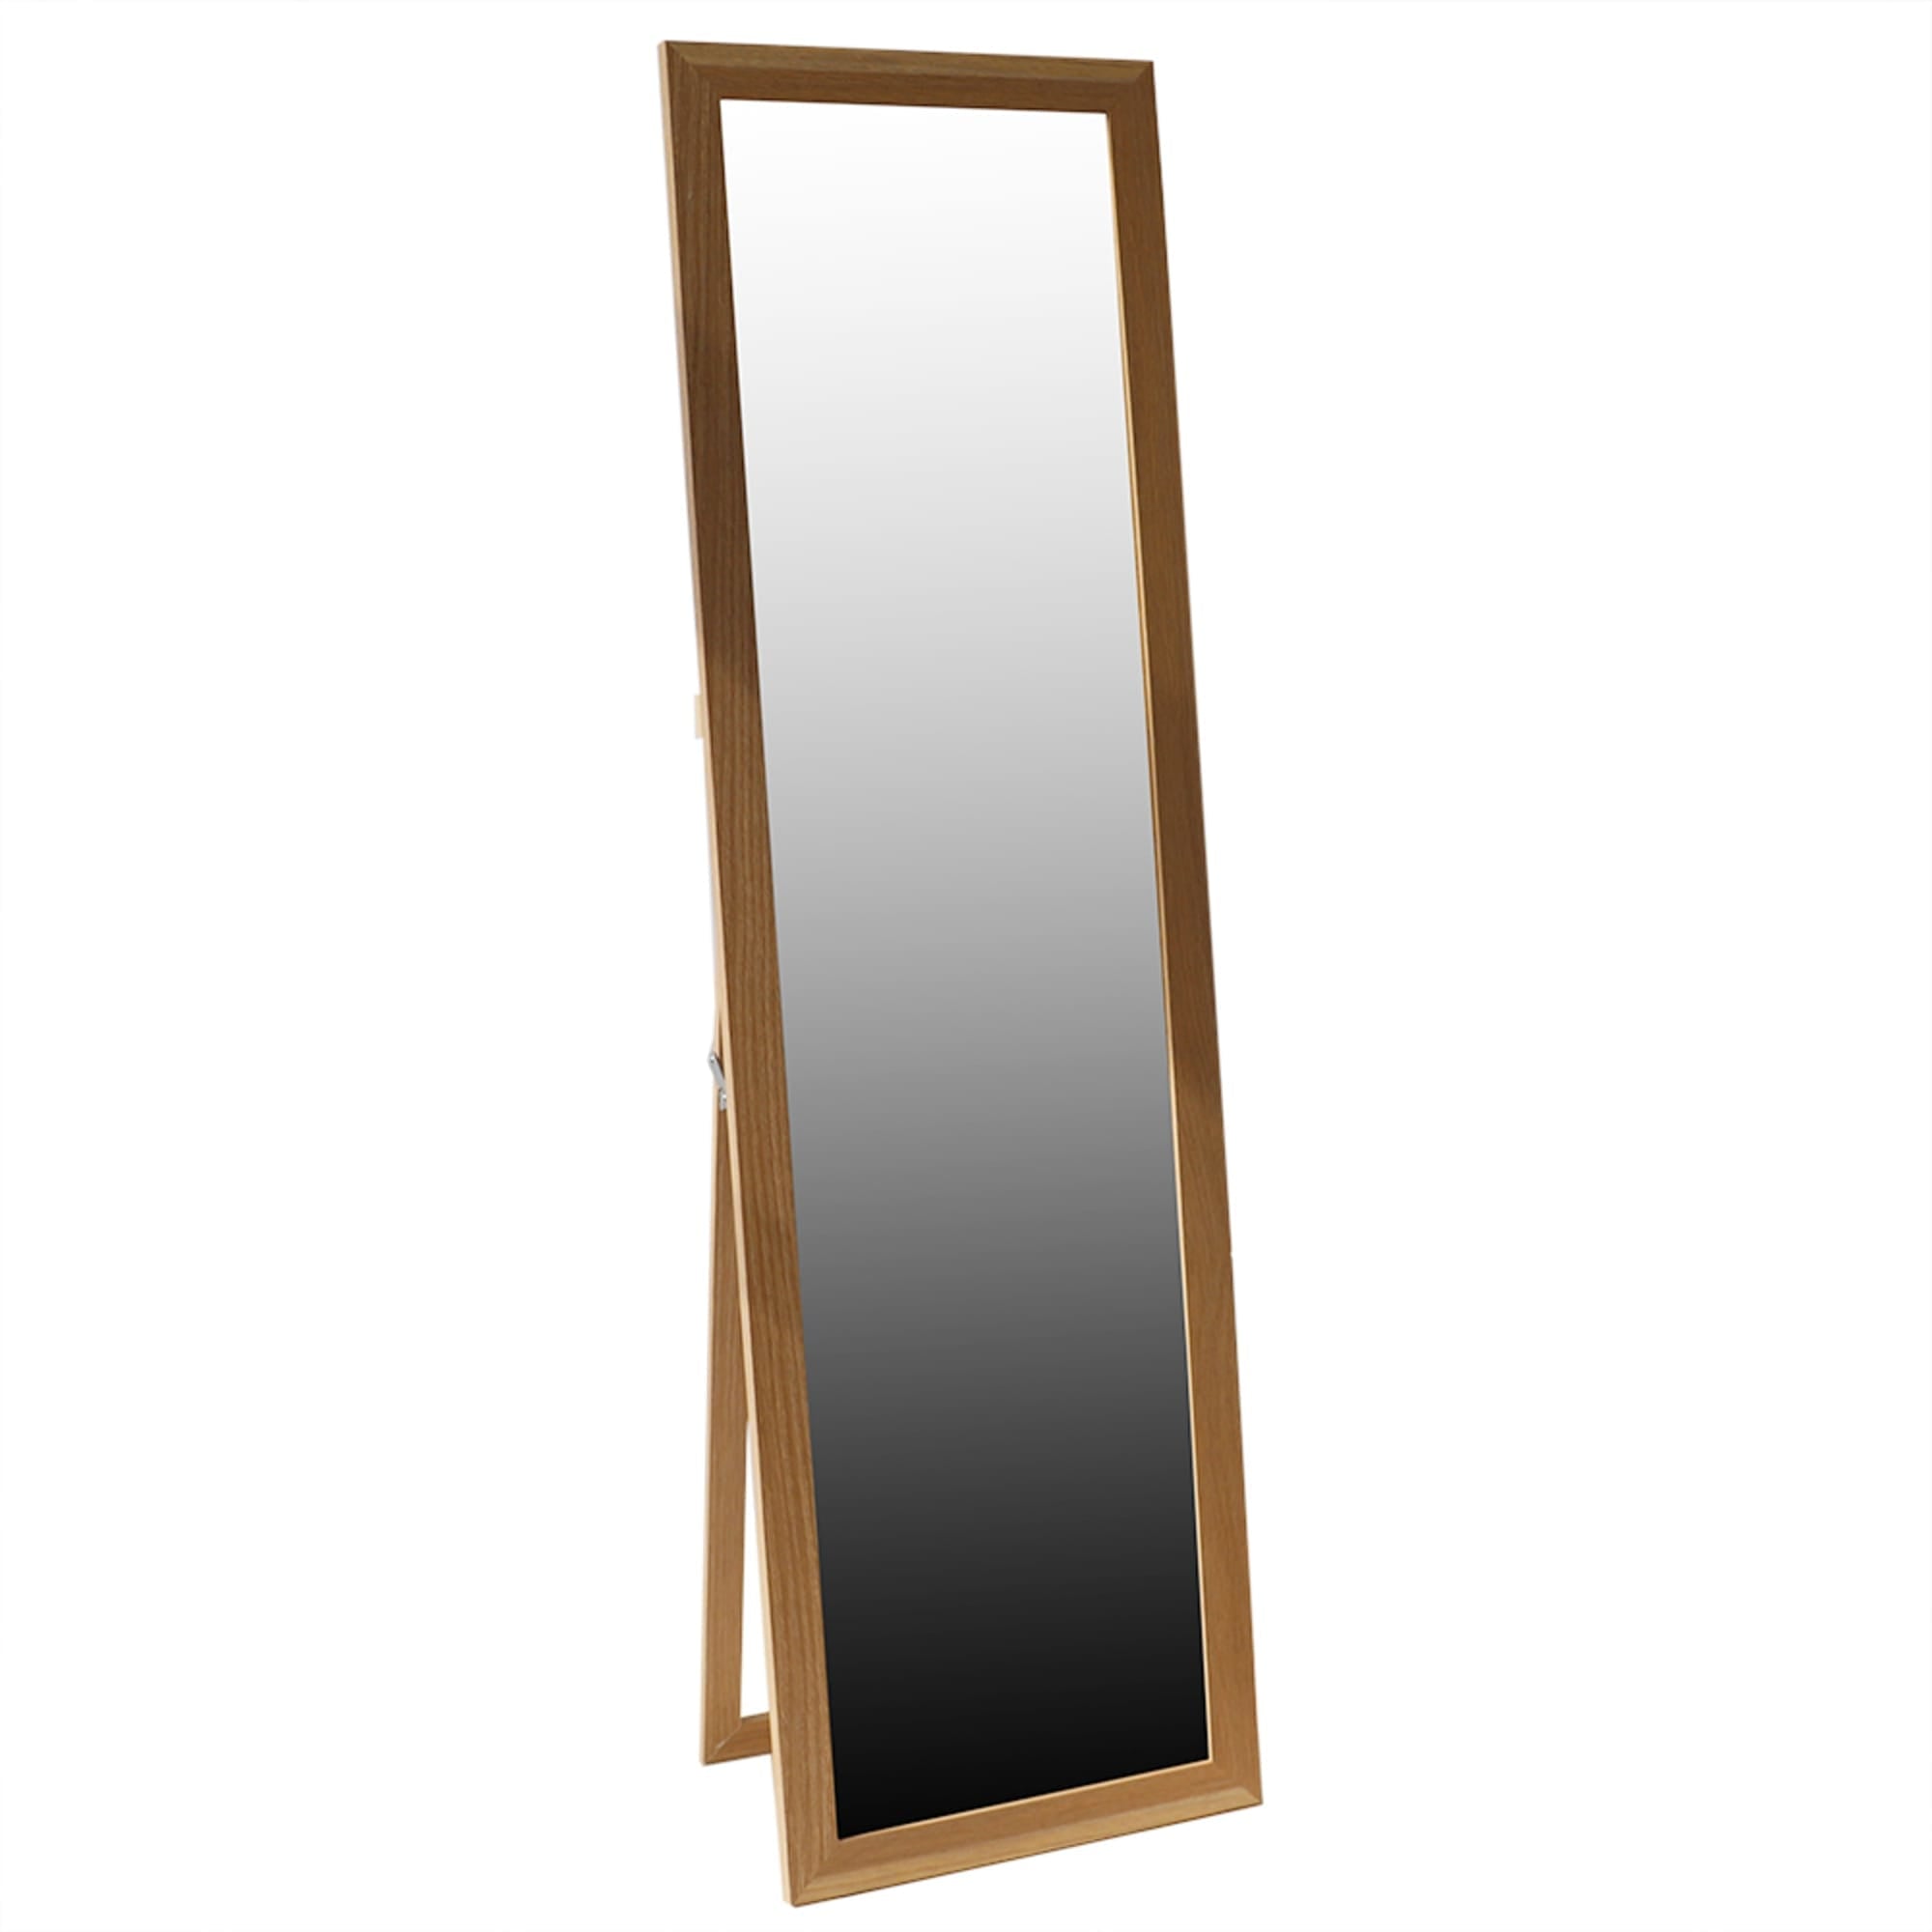 Home Basics Easel Back Full Length Mirror with MDF Frame, Natural $15.00 EACH, CASE PACK OF 6